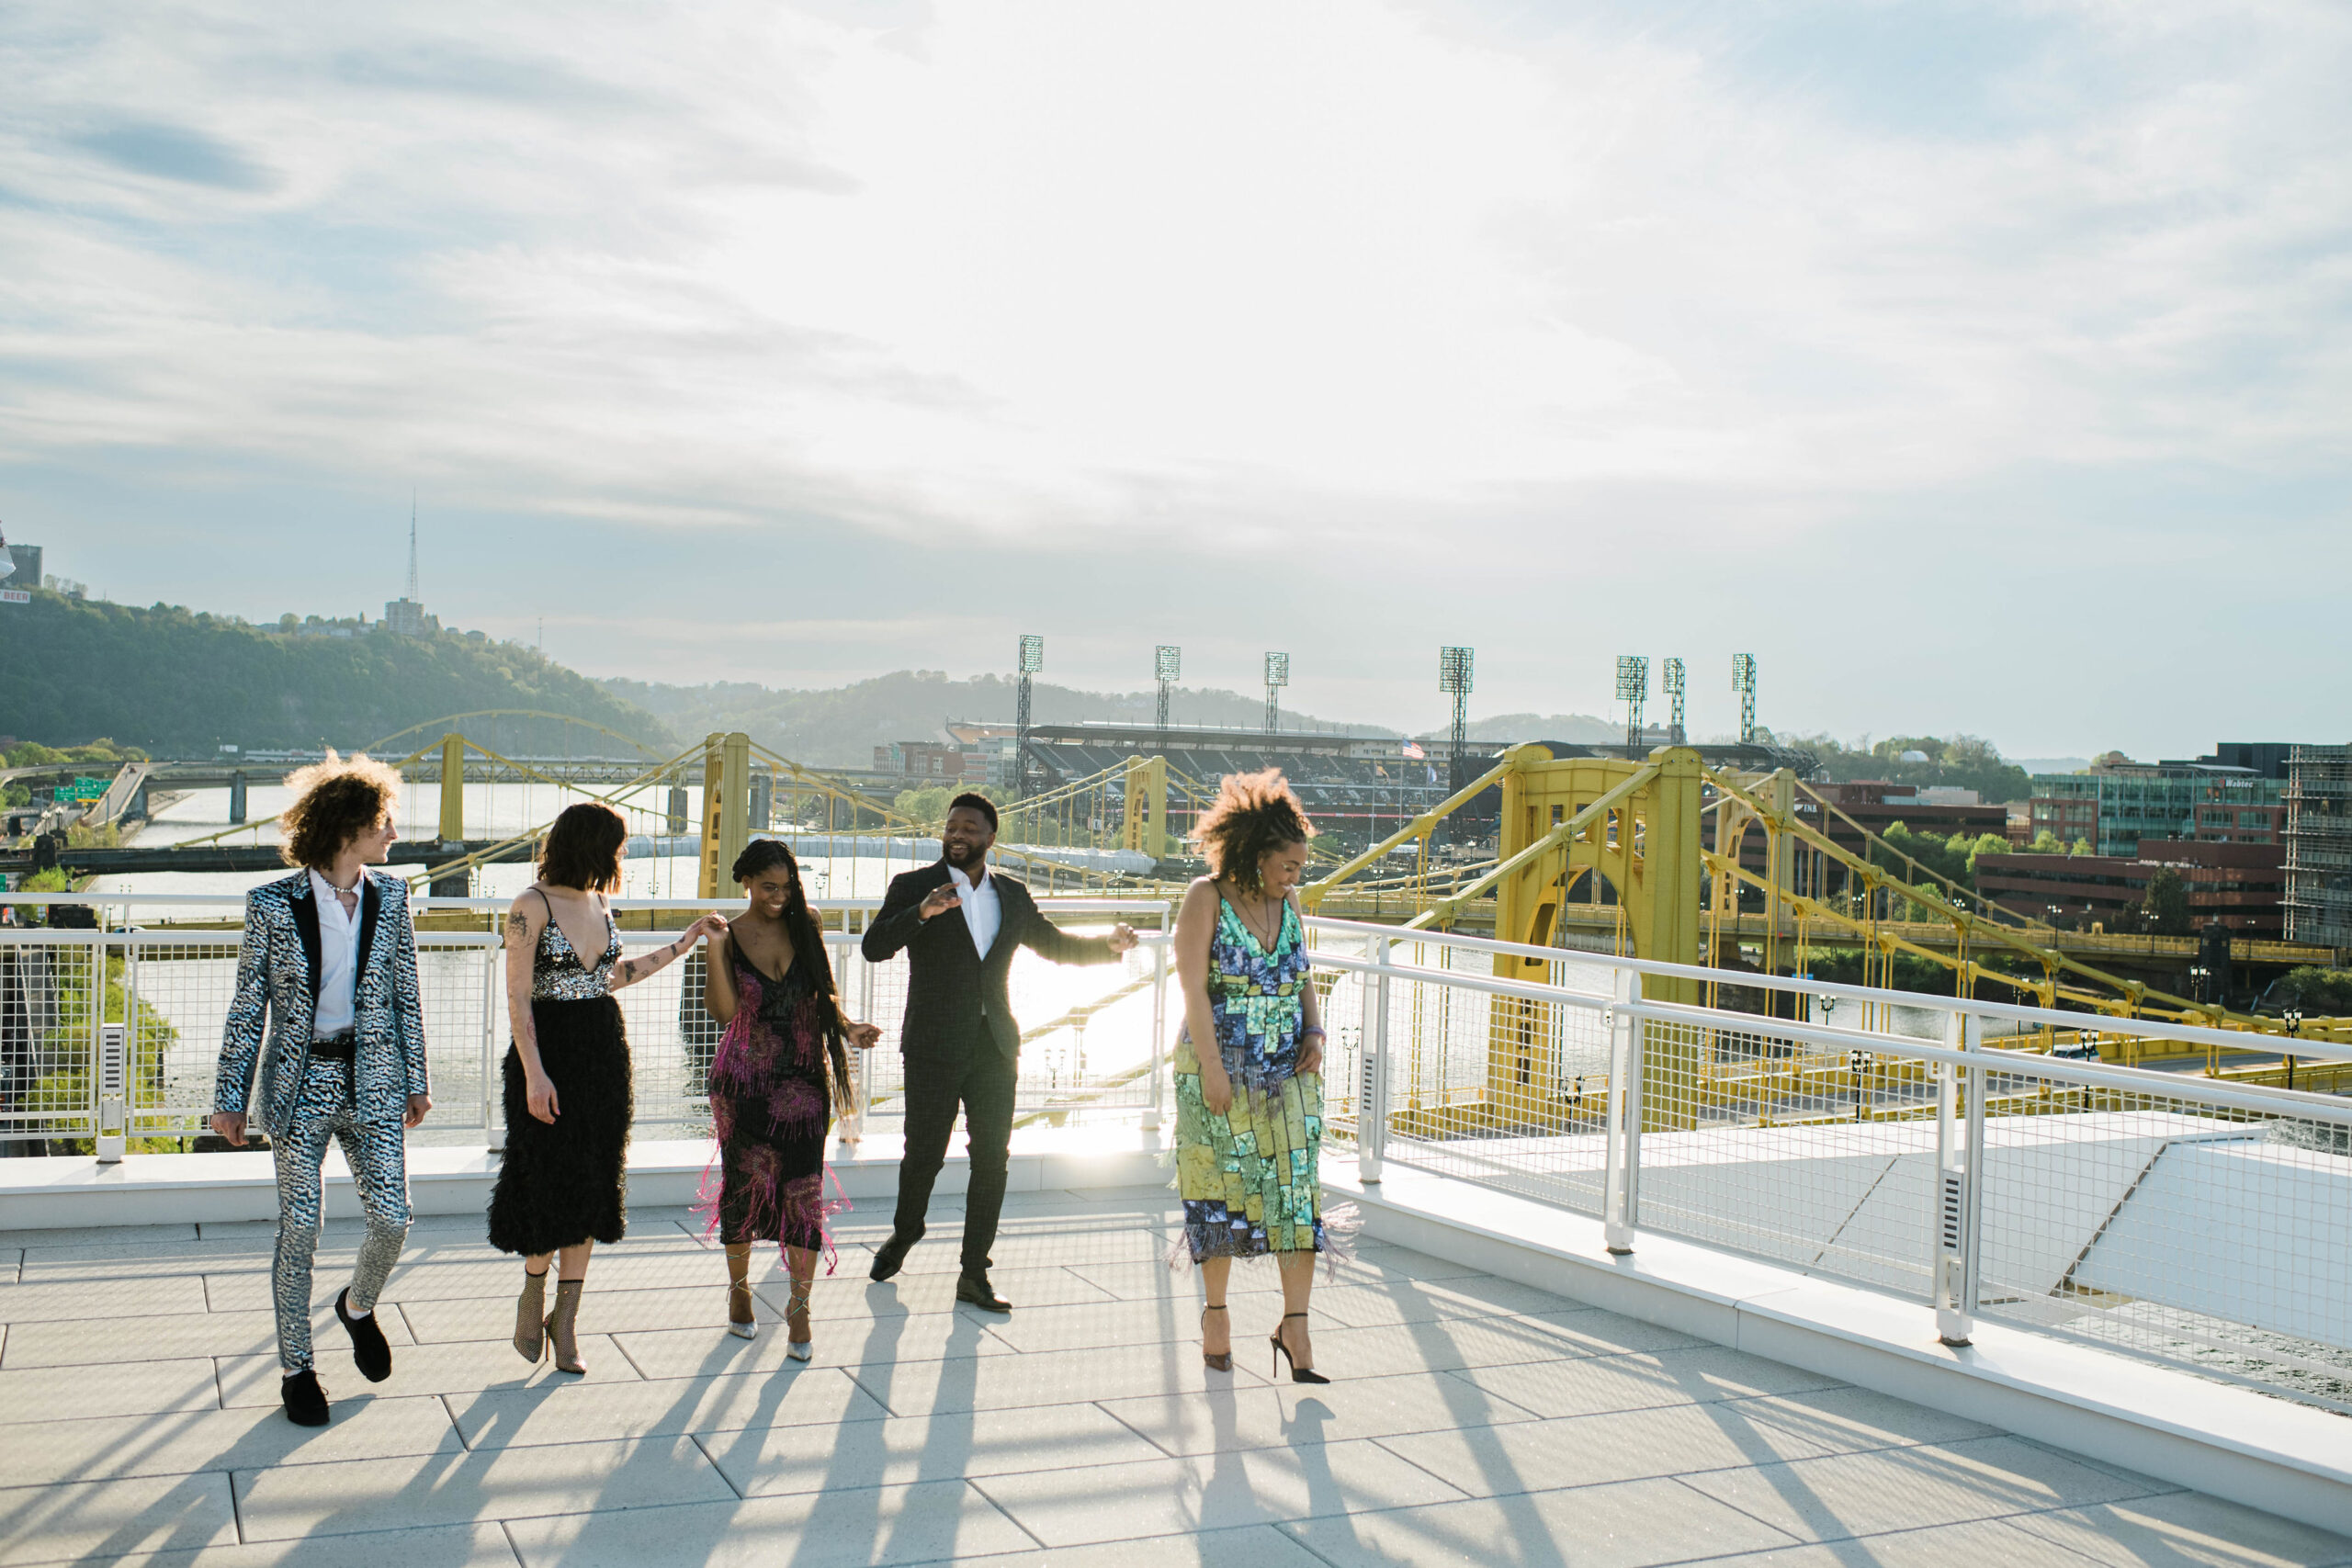 A photo of 5 people talking and dancing on the Rooftop Terrace. In the background are the 3 Sisters Bridges and PNC Park.